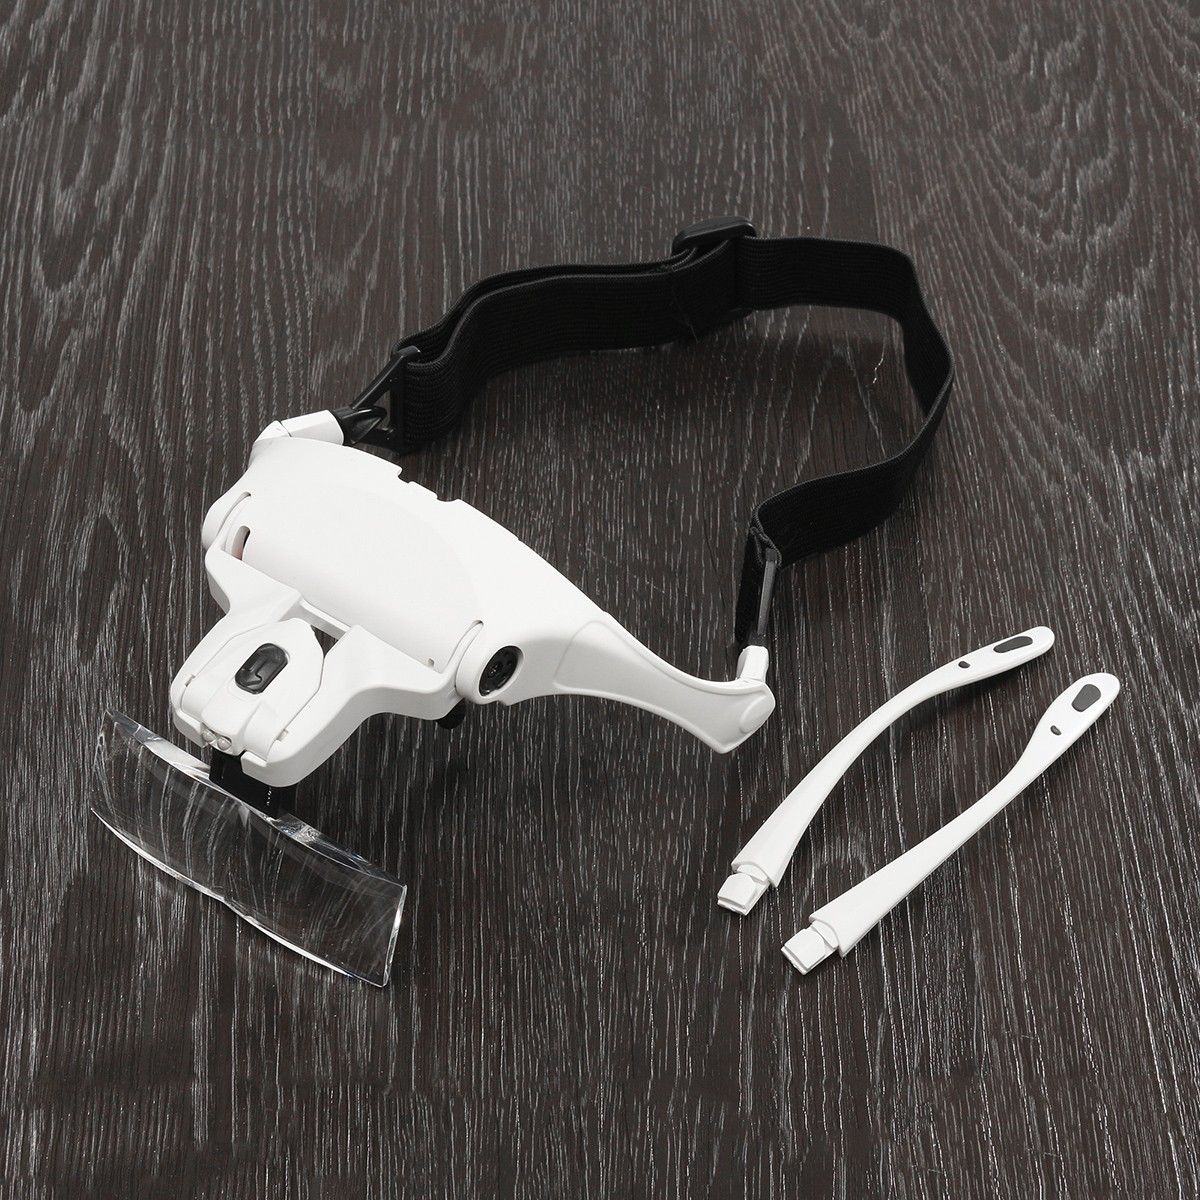 1X-15X-2X-25X-35X-Headband-Headset-Jeweler-Magnifier-Magnifying-Glass-Loupe-Glasses-with-LED-Light-1096858